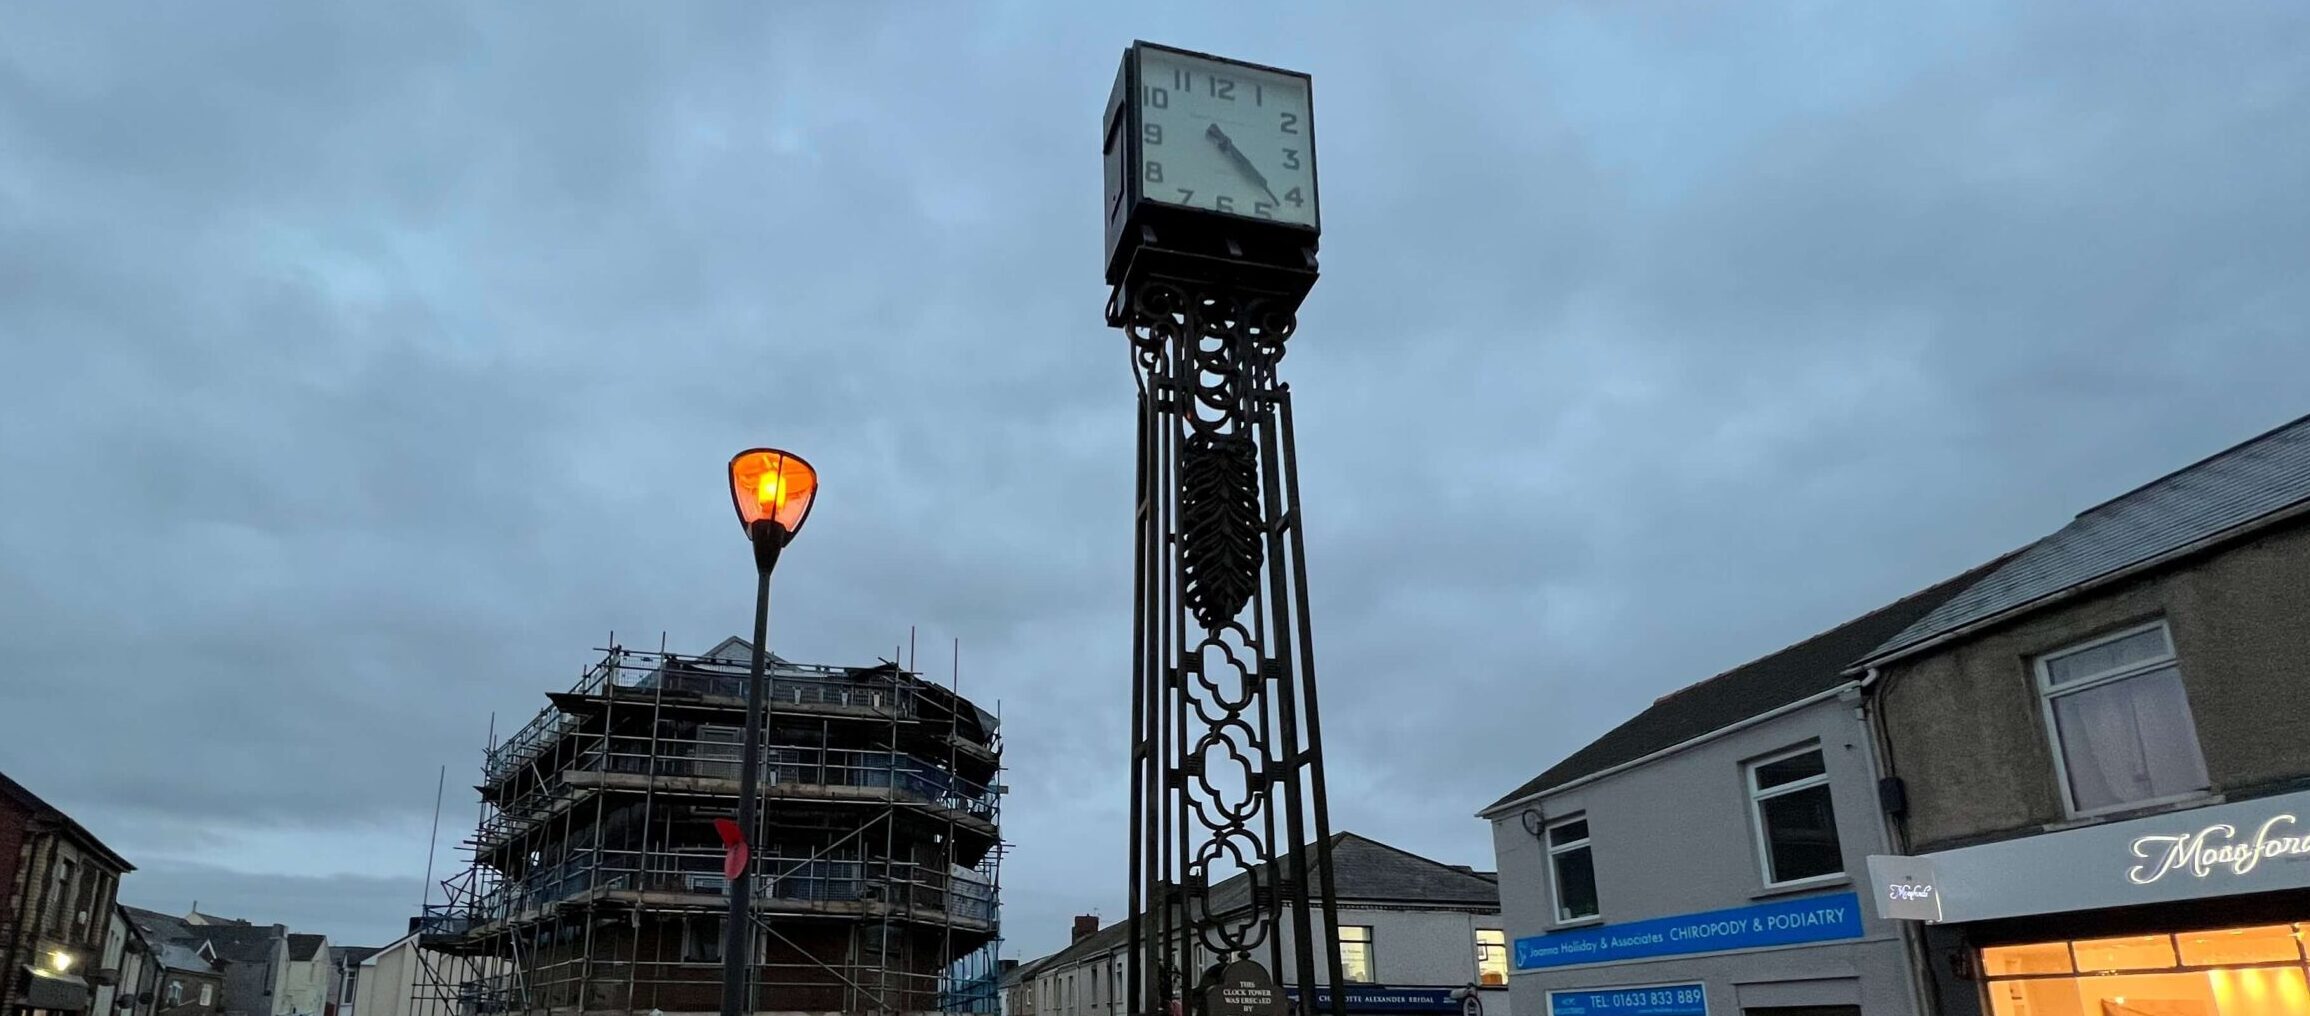 The Old Cwmbran clock tower